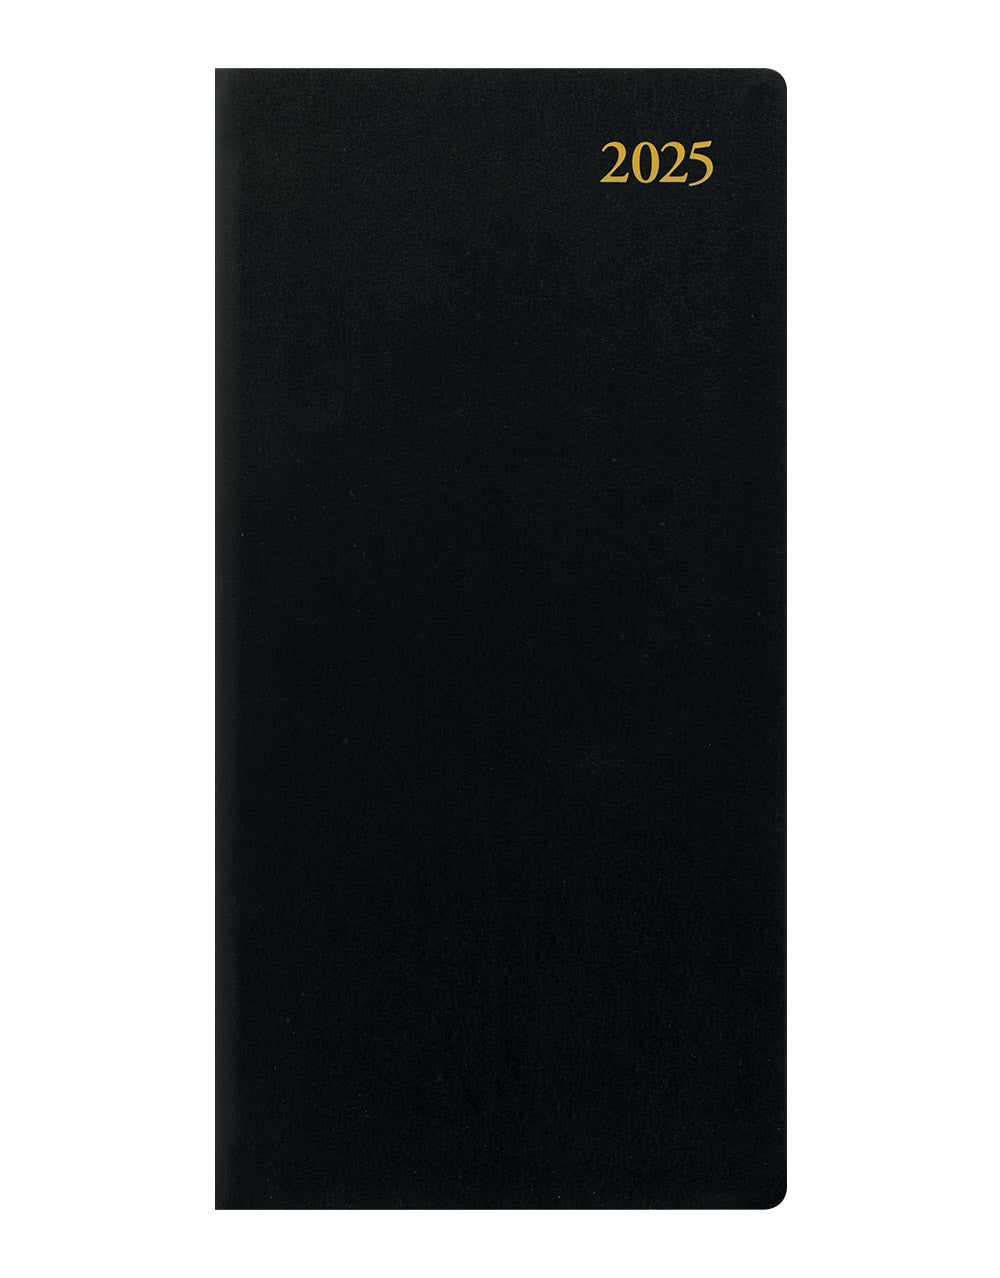 Signature Slim Week to View Leather Diary with Planners 2025 - English 25-C38SUBK#color_black